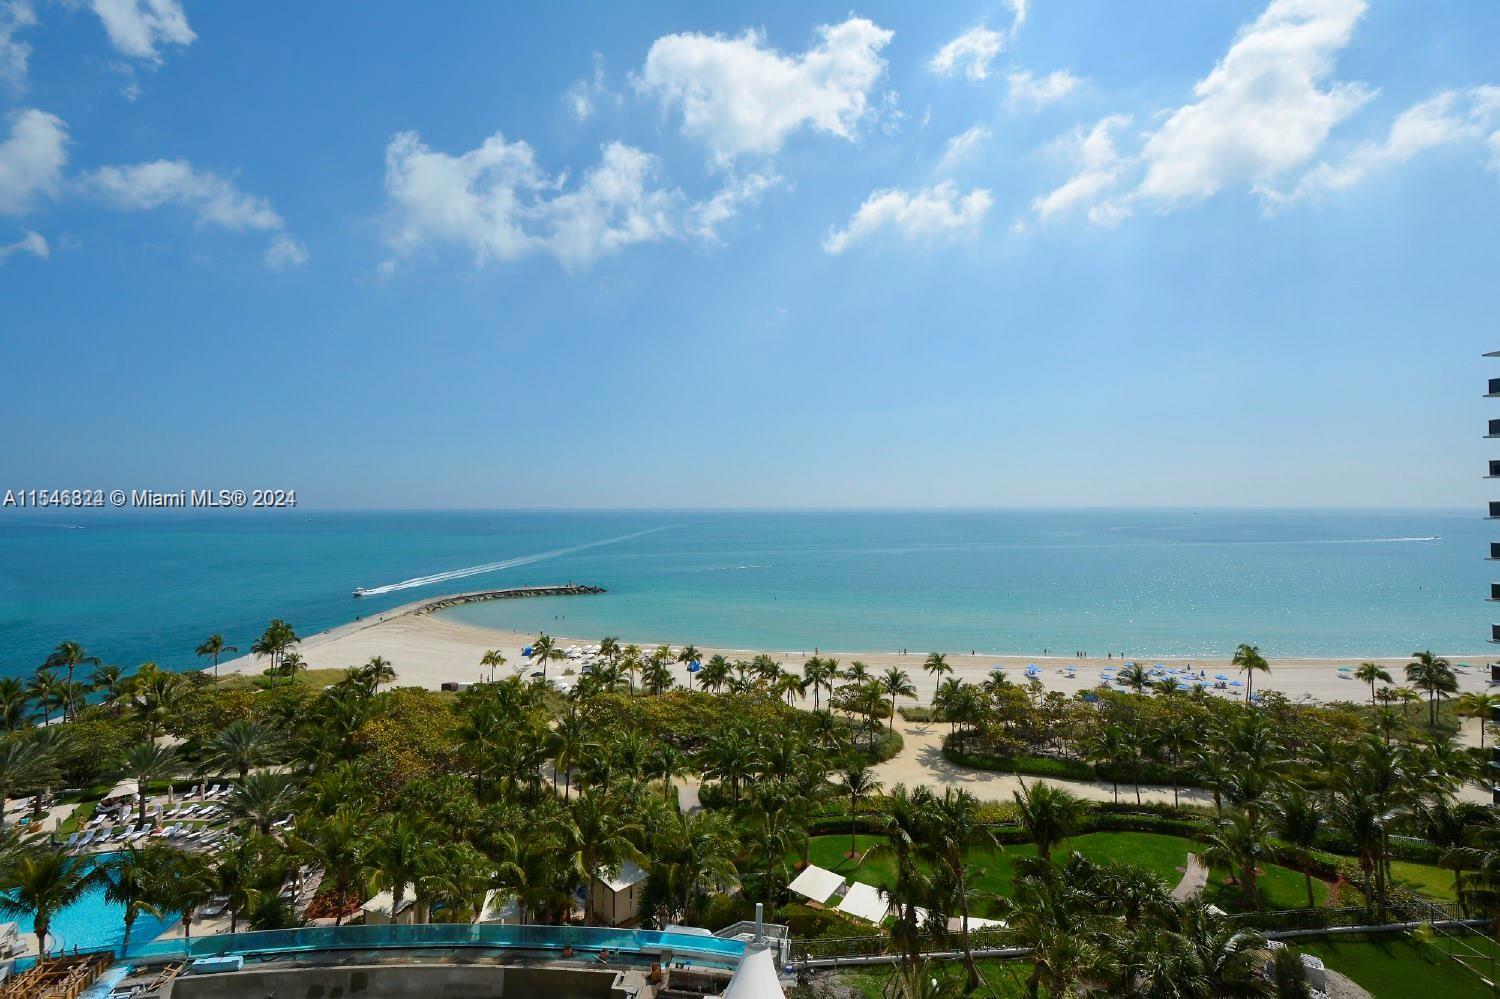 Rarely available best 2 Bdr line in the building. Beautiful direct oceanfront 2/2.5 corner unit with 10Ft ceilings. Floor to ceiling glass windows and stunning unobstructed view of ocean, inlet and bay.The most luxurious living in Bal Harbour offering 5 stars amenities, 24Hr concierge and security, valet parking, beach service, fitness center, 2 pools, Spa, dining, bar, residents theatre, conference and party room. Unit features High end appliances including Wolf, Miele, Subzero, Bosch... European cabinetry, marble floor, lots of storage. Laundry room.  Steps away from the world famous Bal Harbour Mall, fine dining, grocery shopping... United rented until end of April. Need 24 hr notice to show. Please text Listing  agent.